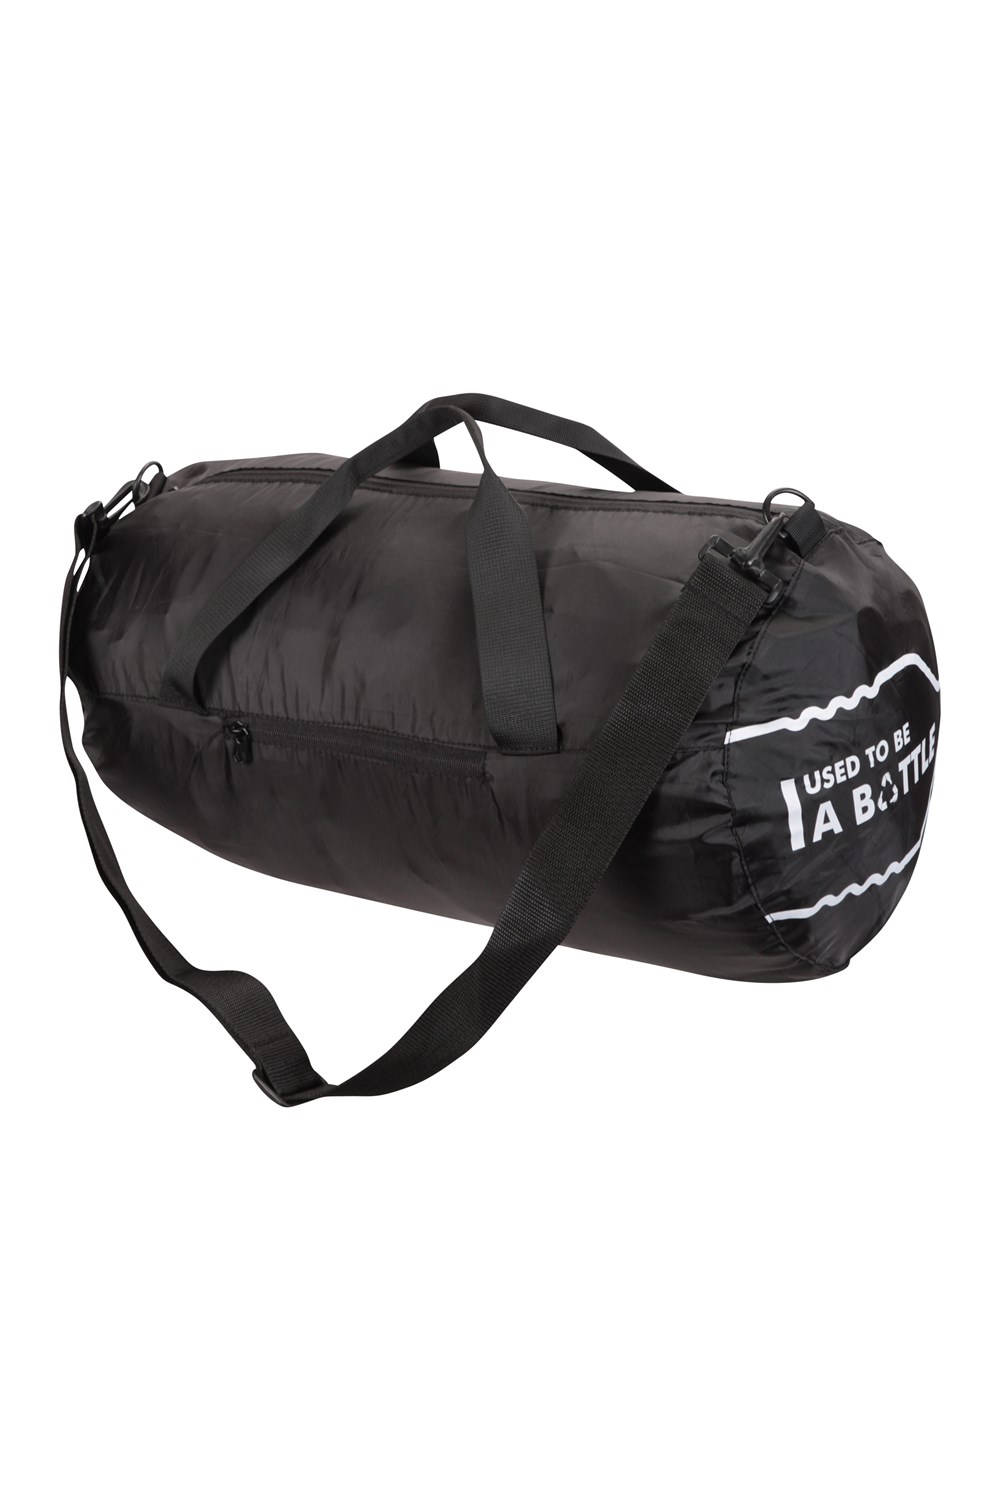 Mountain Warehouse RPET Packaway Holdall - Eco Friendly Cabin Bag, Carry Handle | eBay